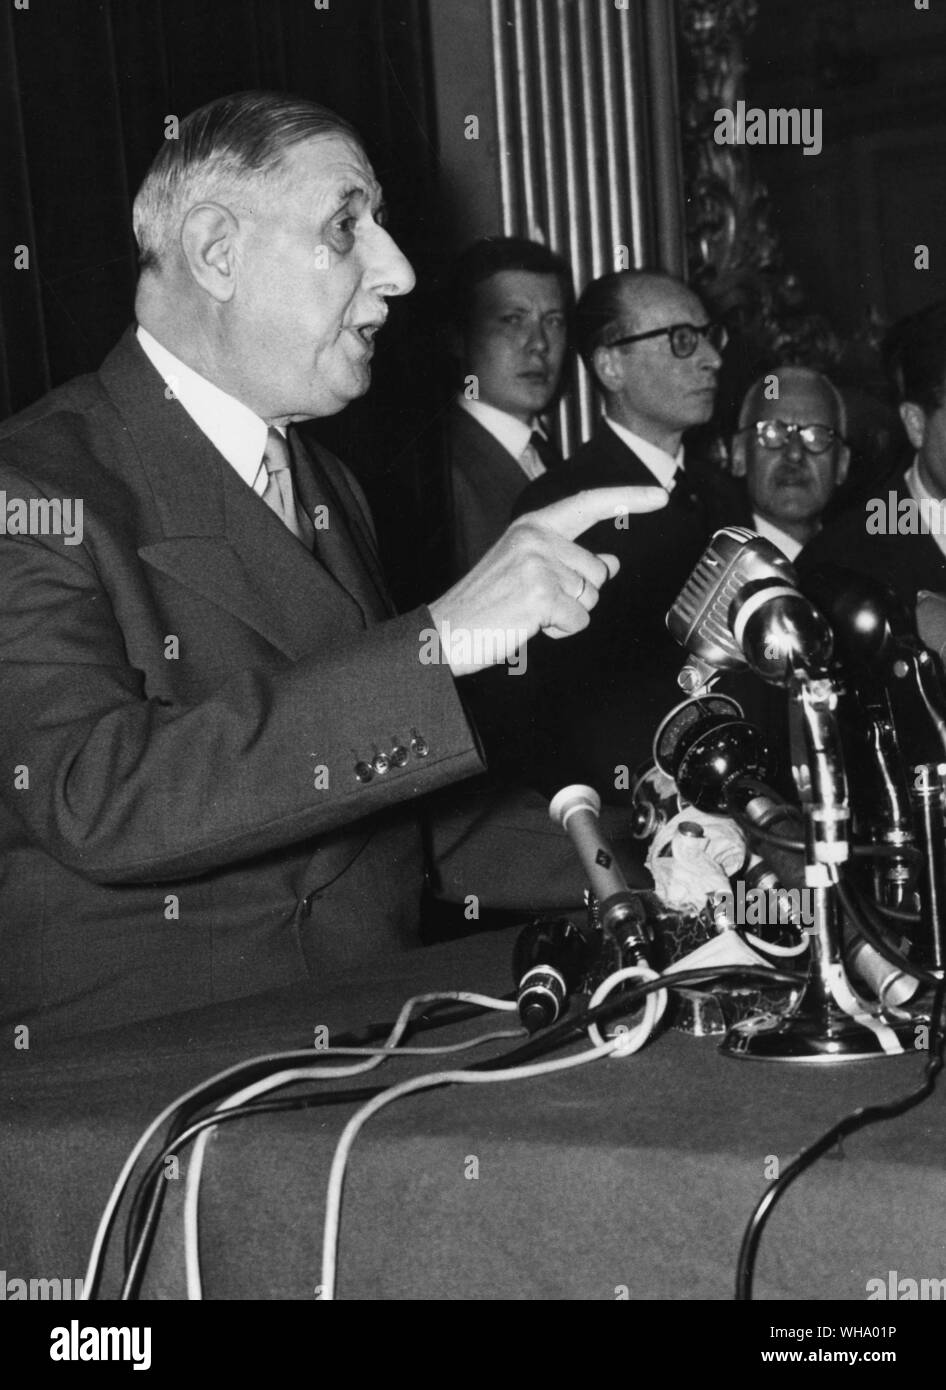 Aged 67, Charles de Gaulle speaks at a press conference in Paris. General de Gaulle declared that he was ready to take control of the government. 20th May 1958. Stock Photo